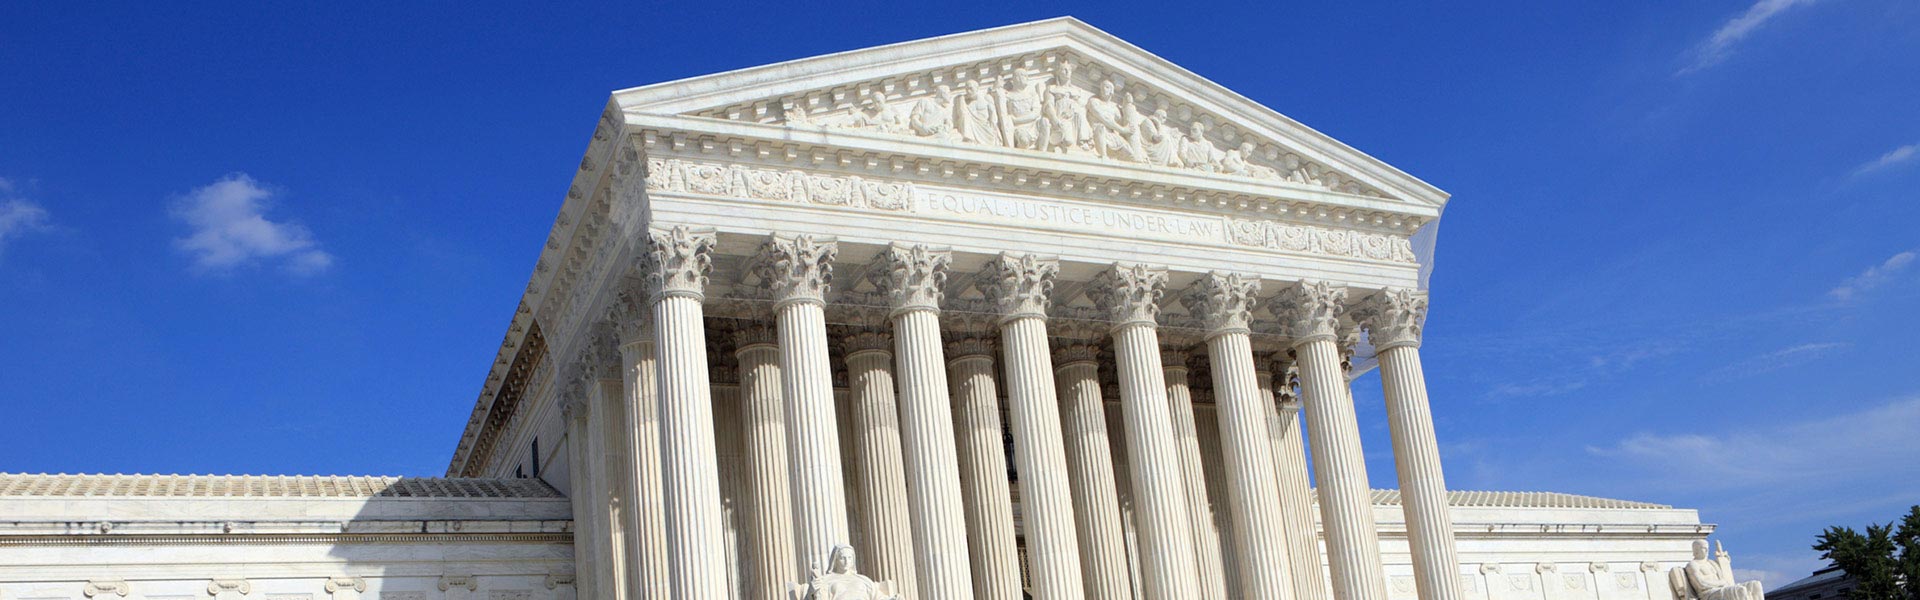 can you tour the supreme court in dc